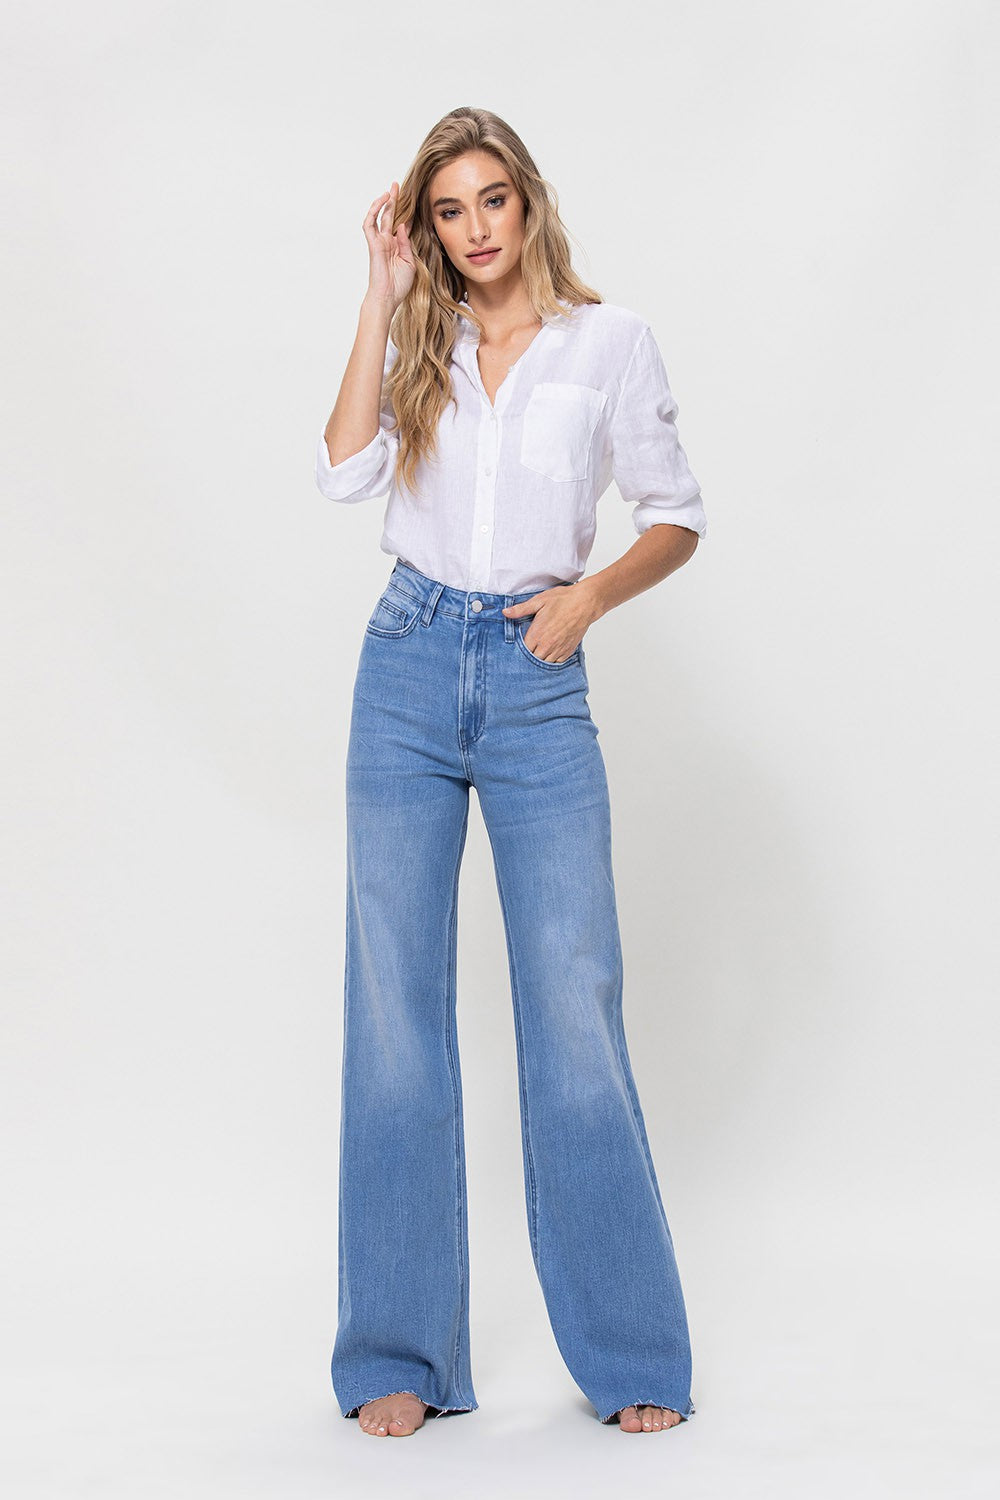 How to wear cropped flare hem jeans - Adored By Alex